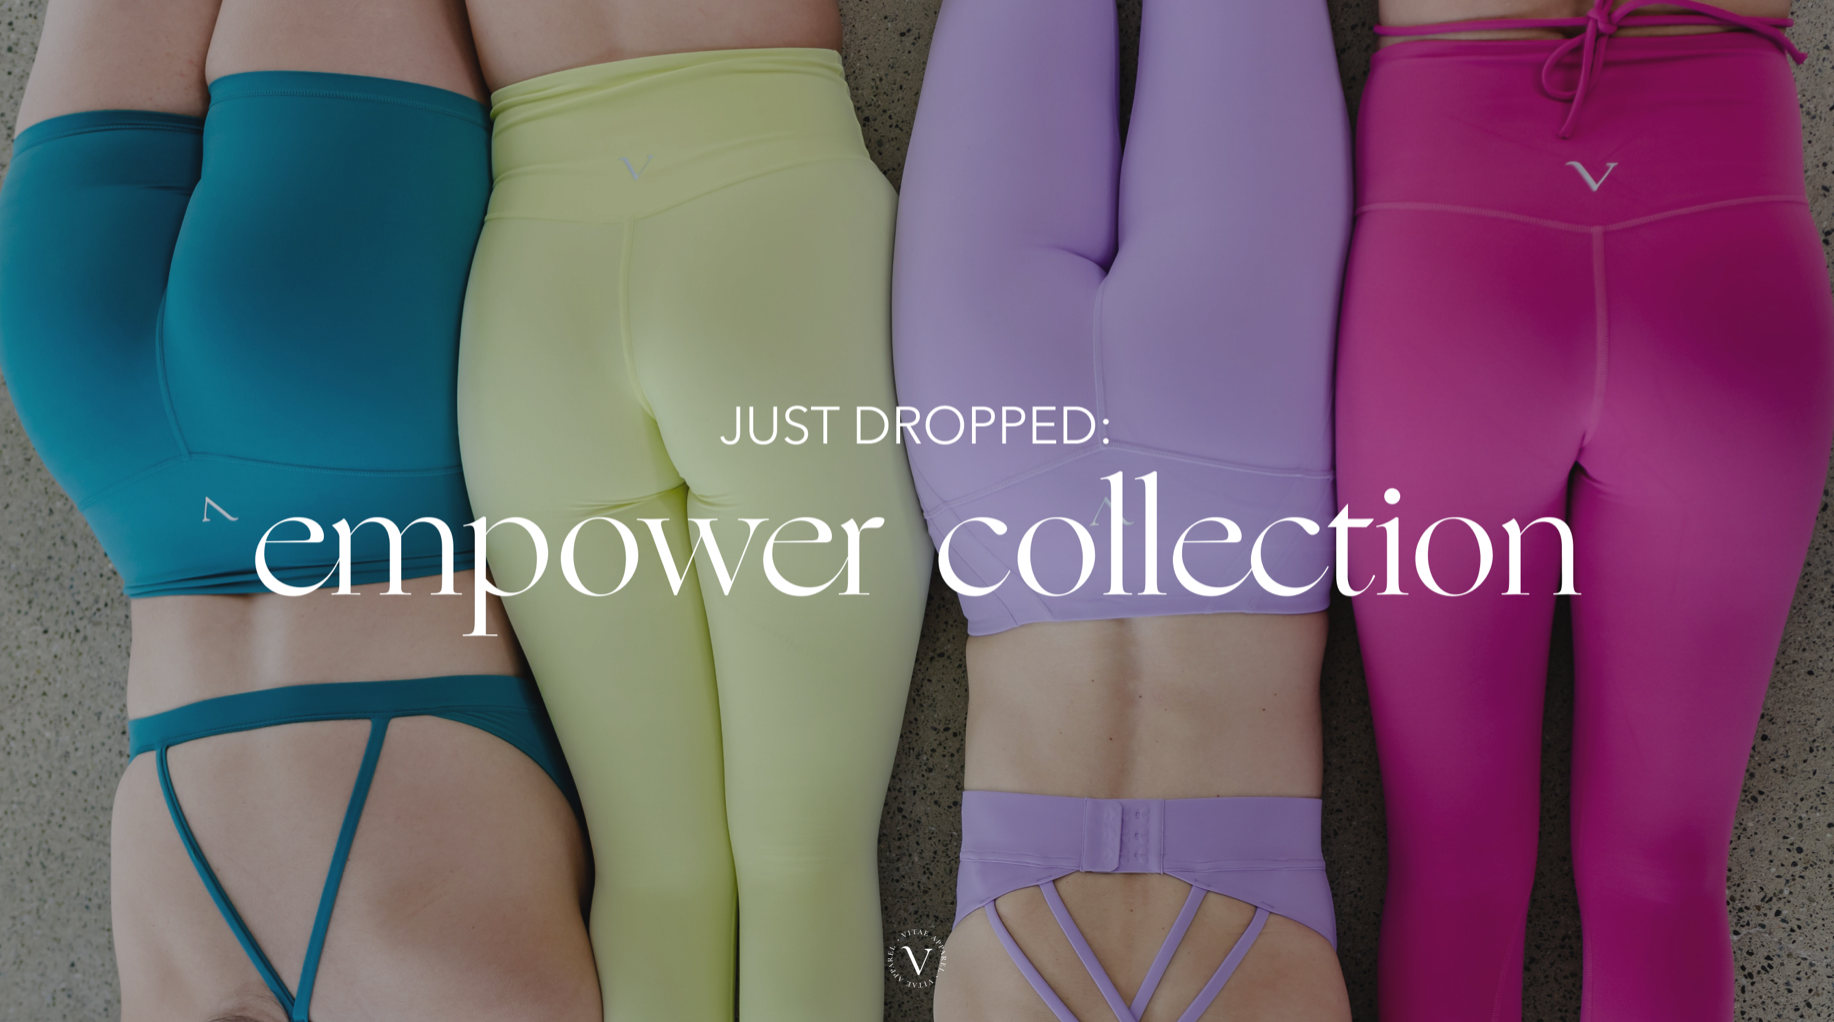 JUST DROPPED: THE EMPOWER COLLECTION – VITAE APPAREL